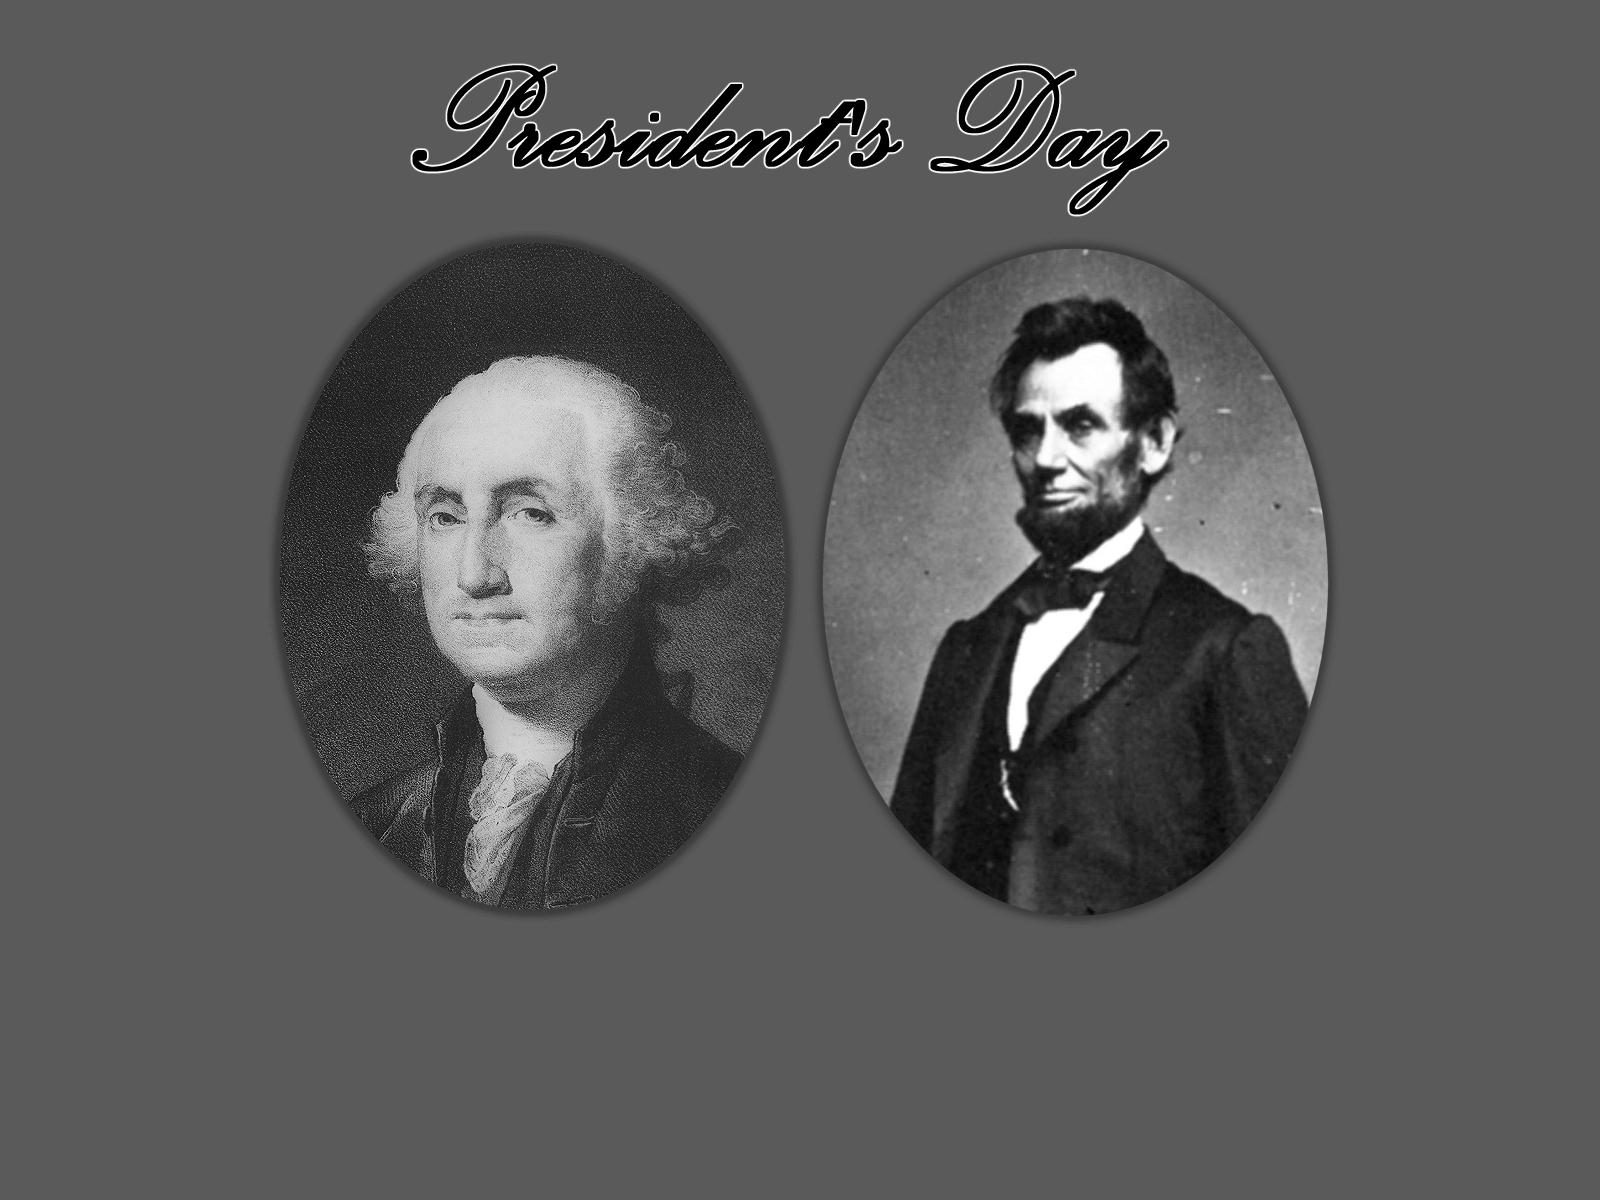 Presidents' Day Wallpapers